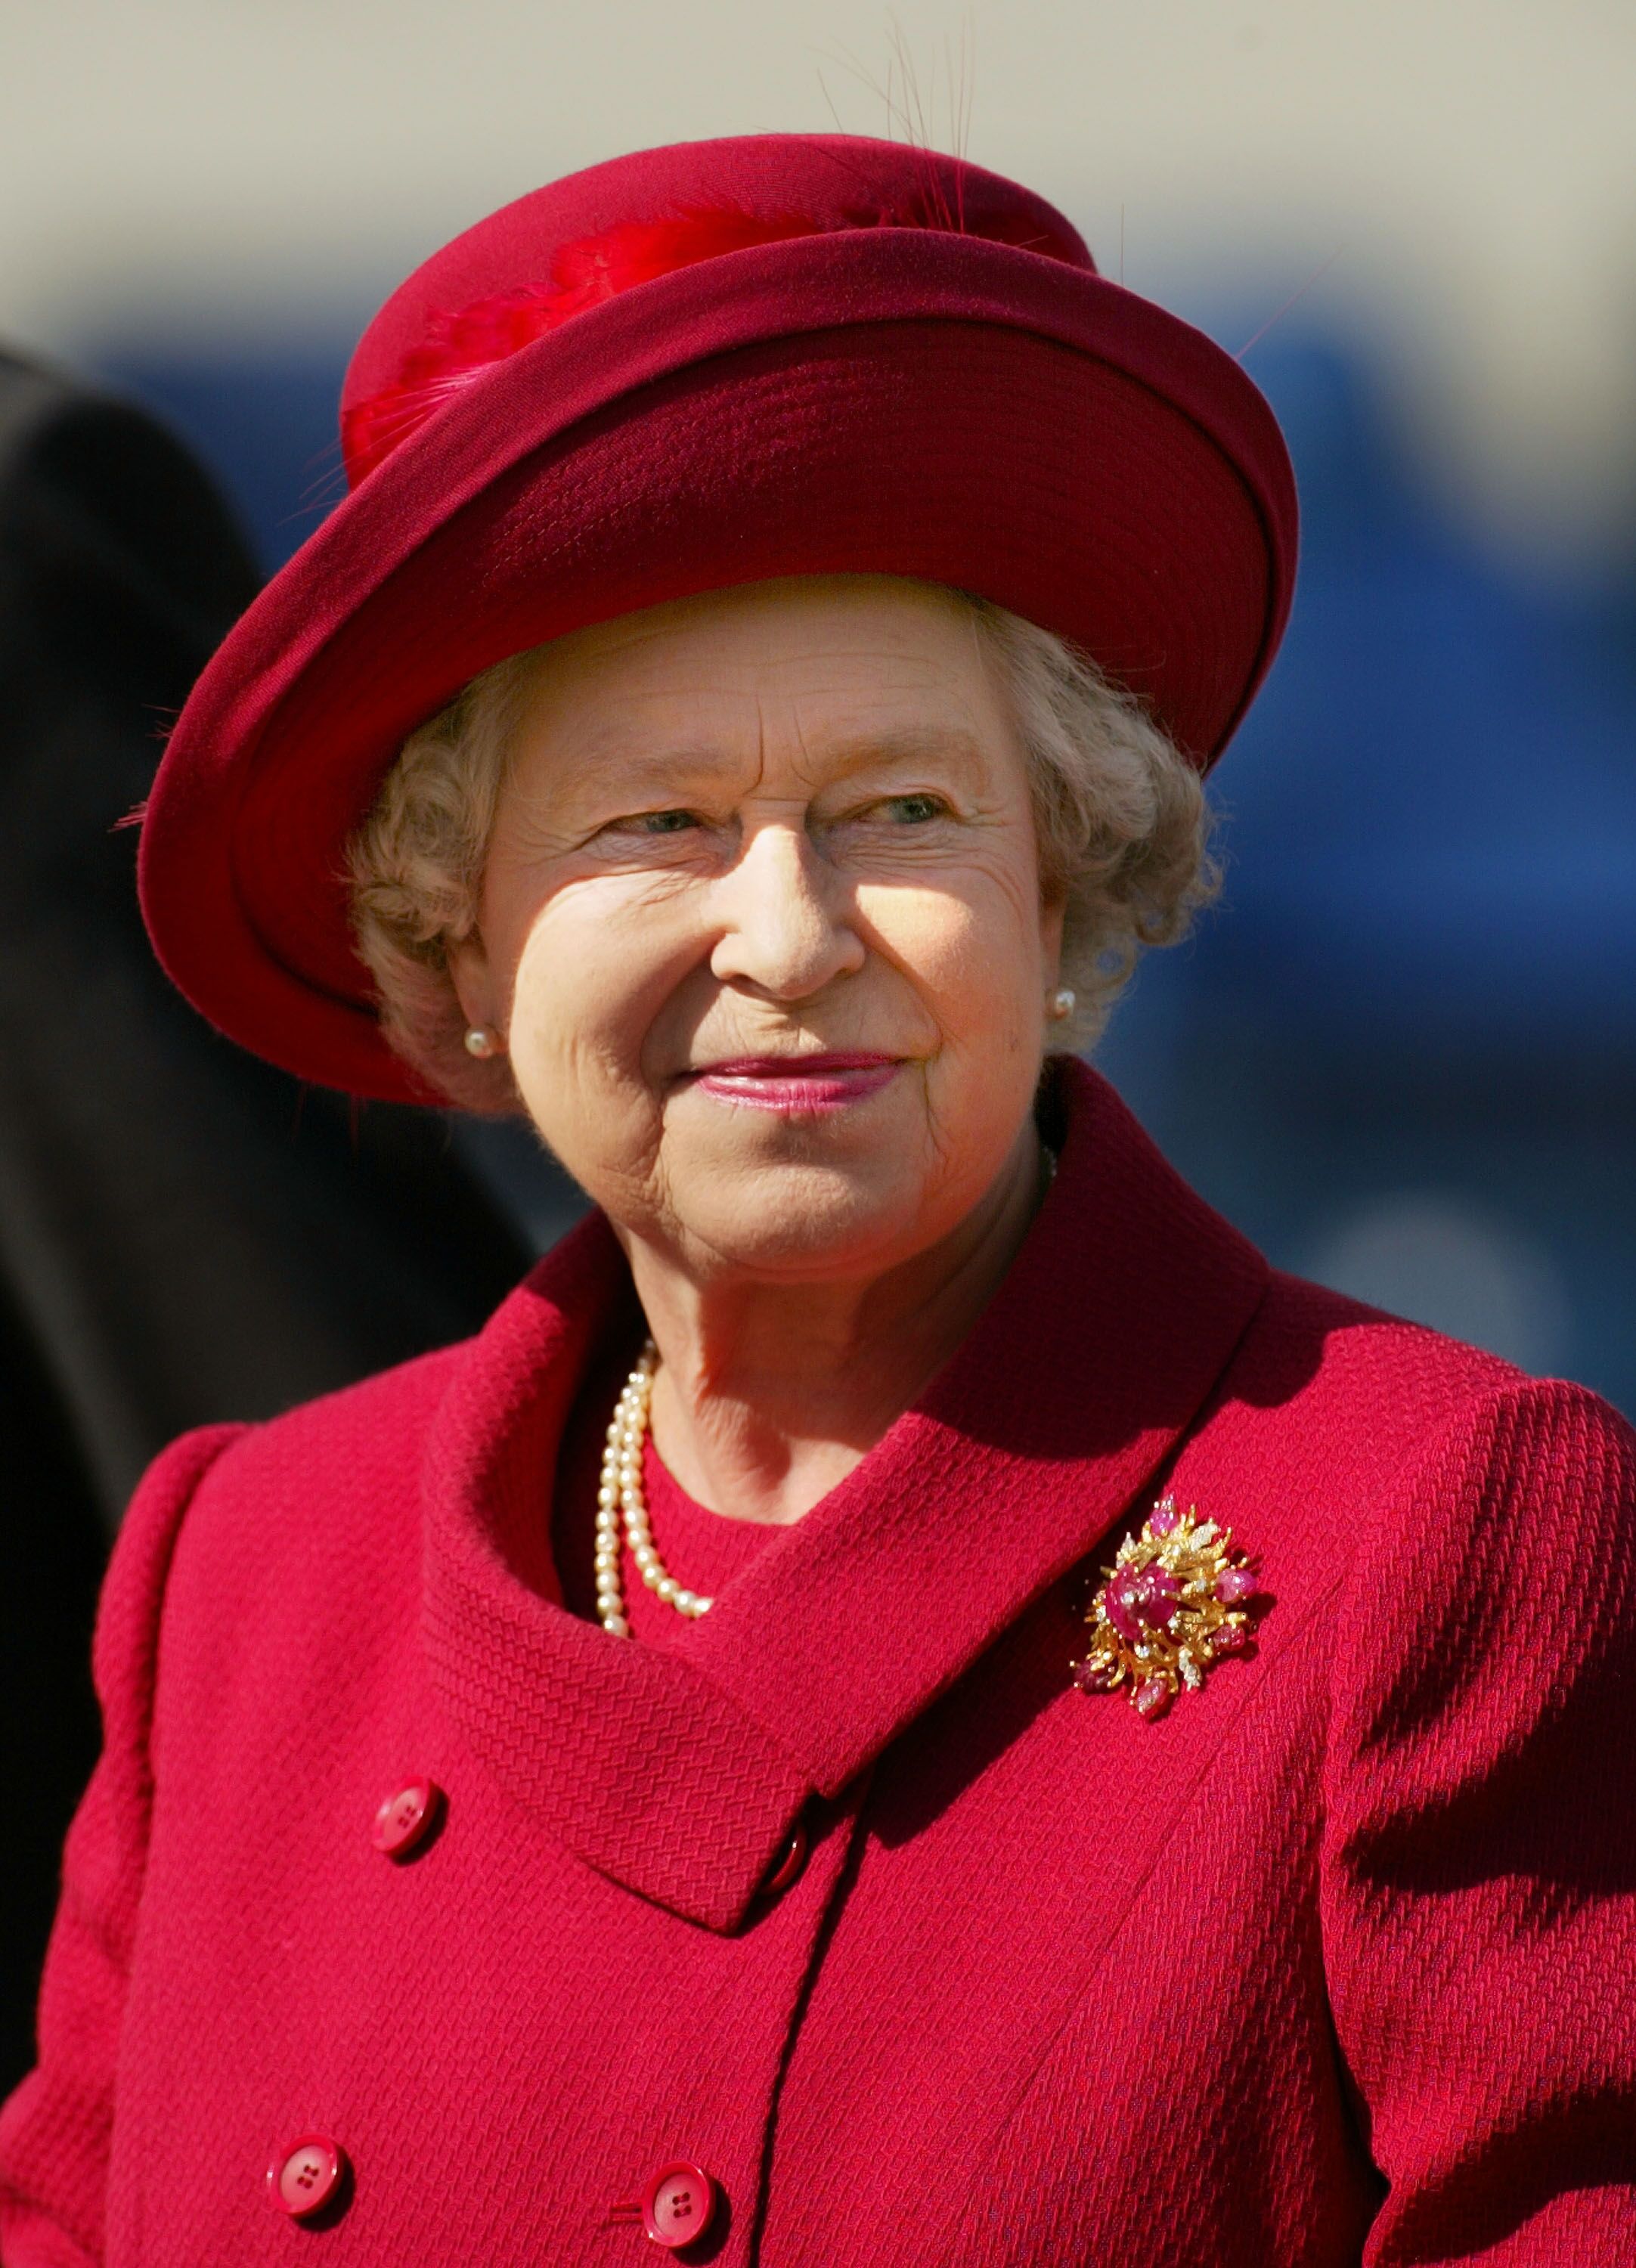  Queen Elizabeth at The Royal Windsor Horse Show at Windsor Great Park, England in May 18, 2002. | Sources: Getty Images